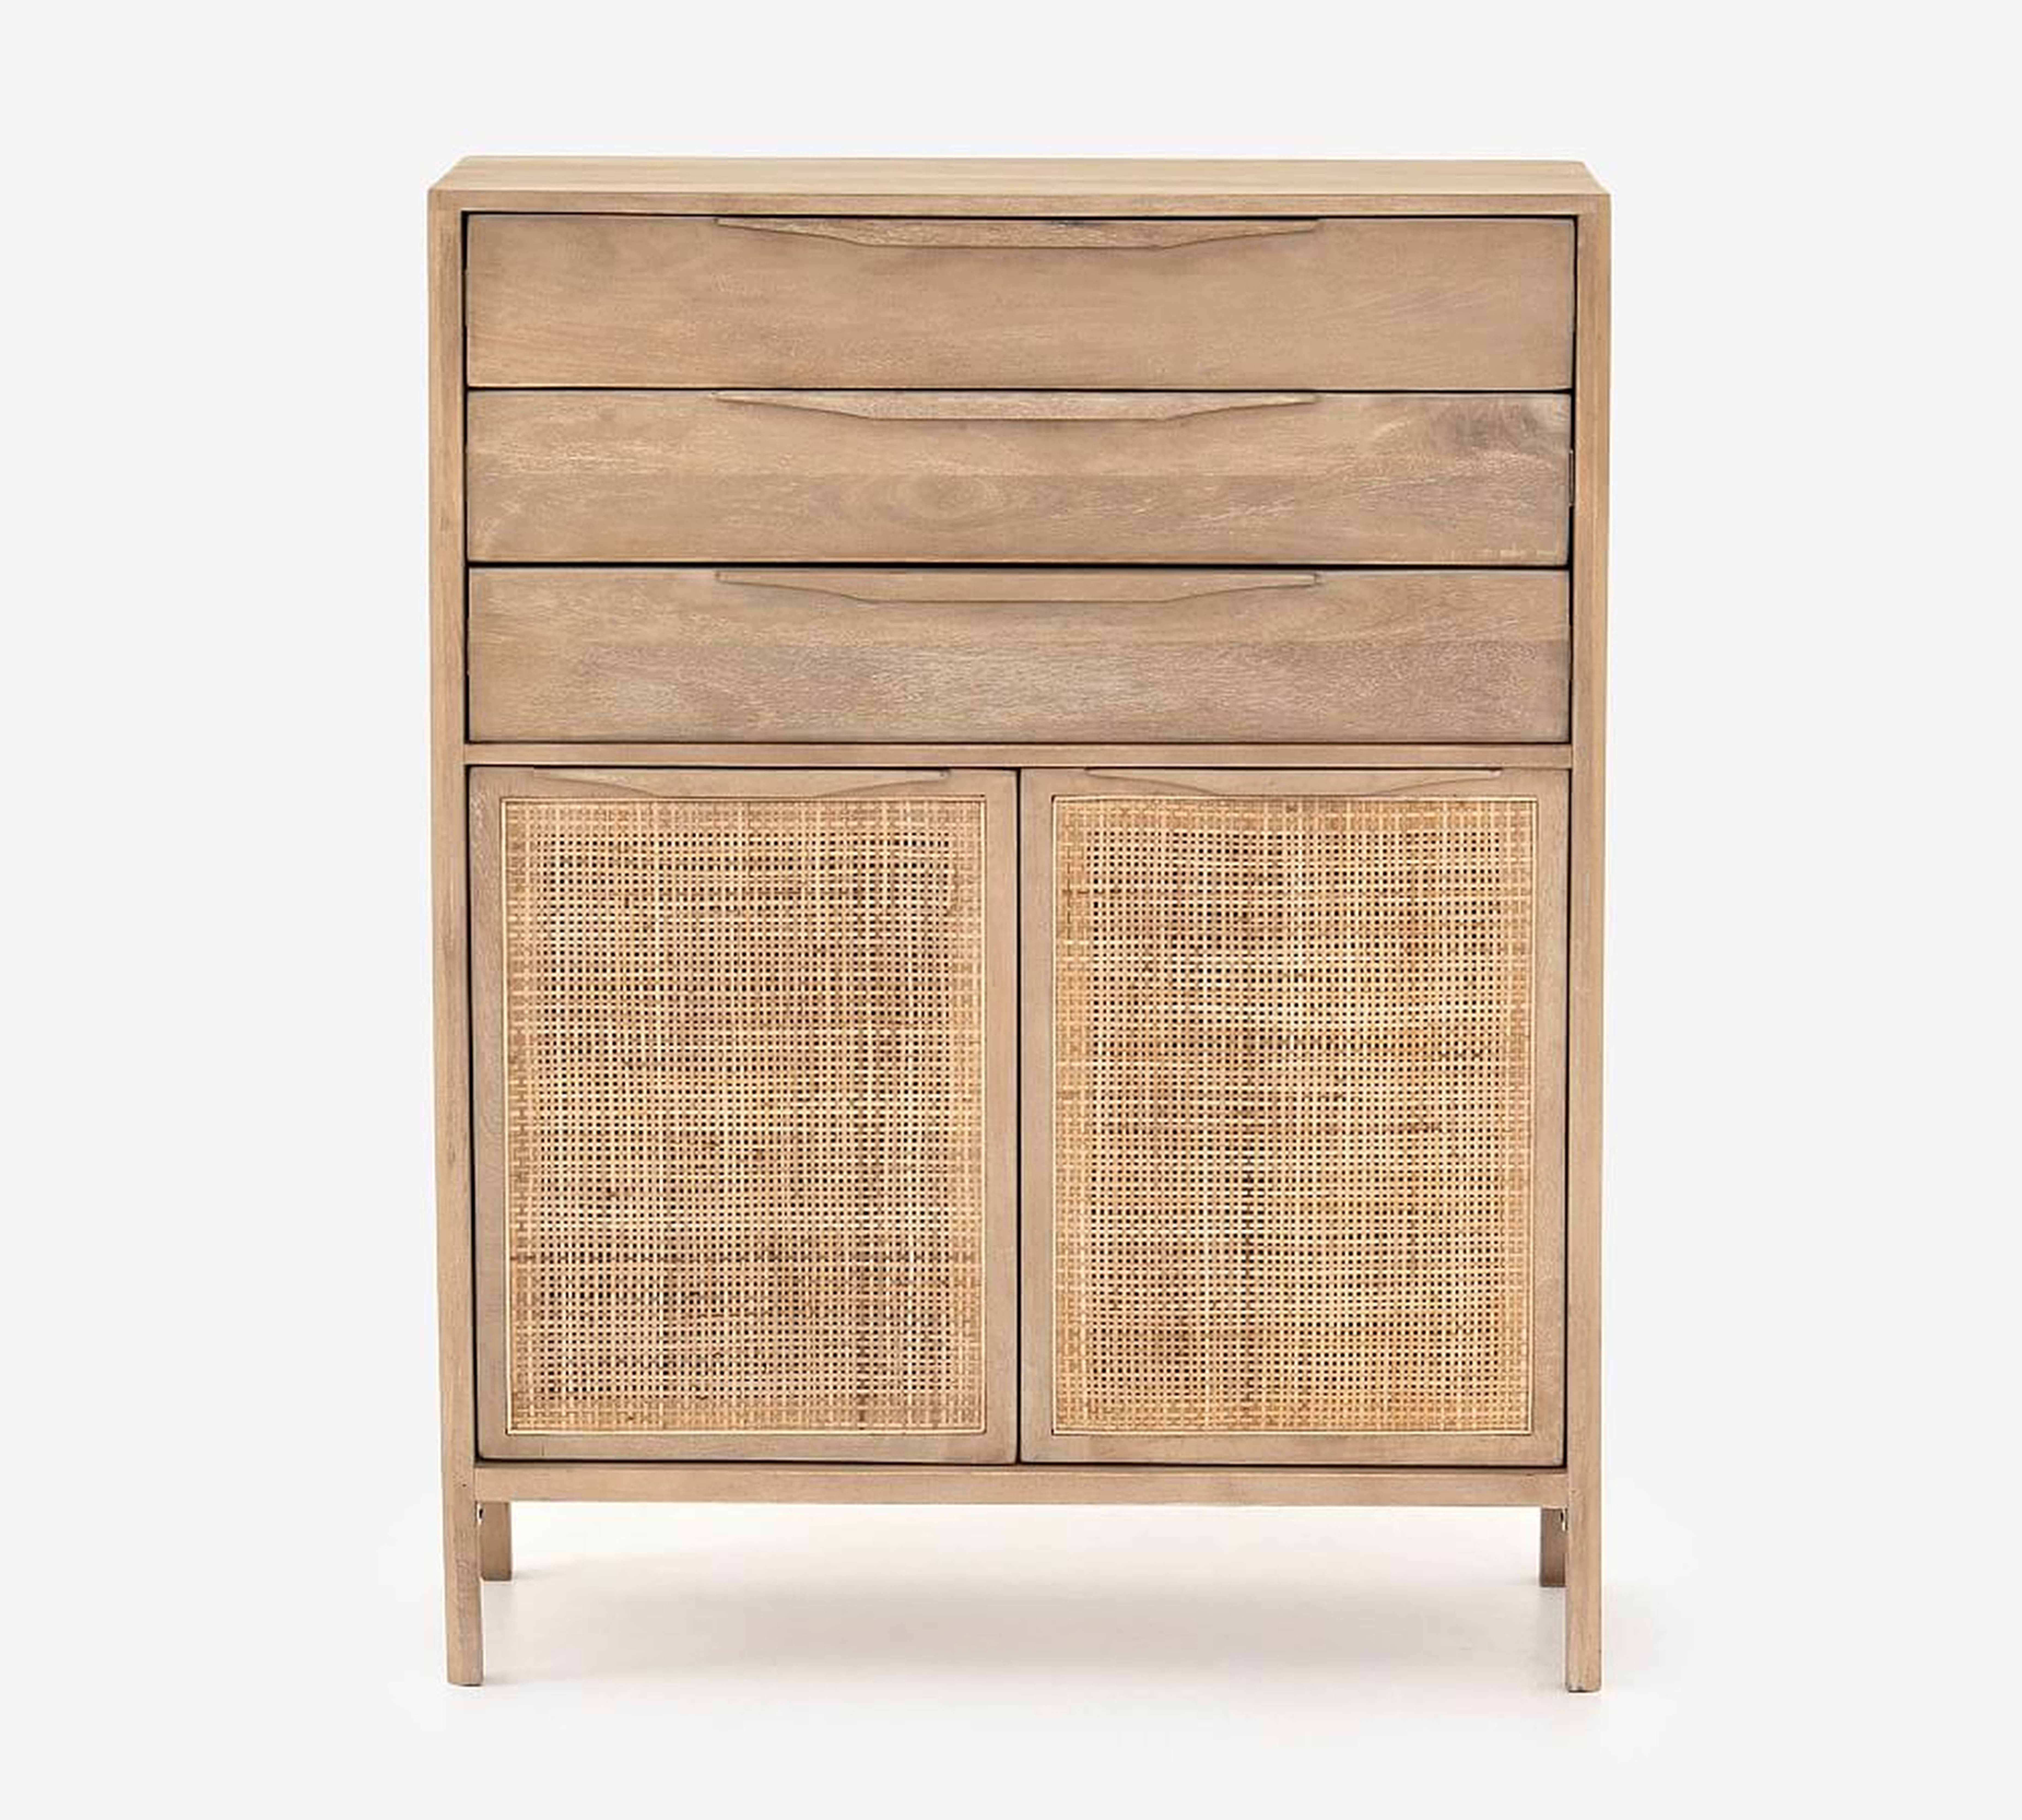 Dolores Cane 3-Drawer Tall Dresser, Natural - Pottery Barn